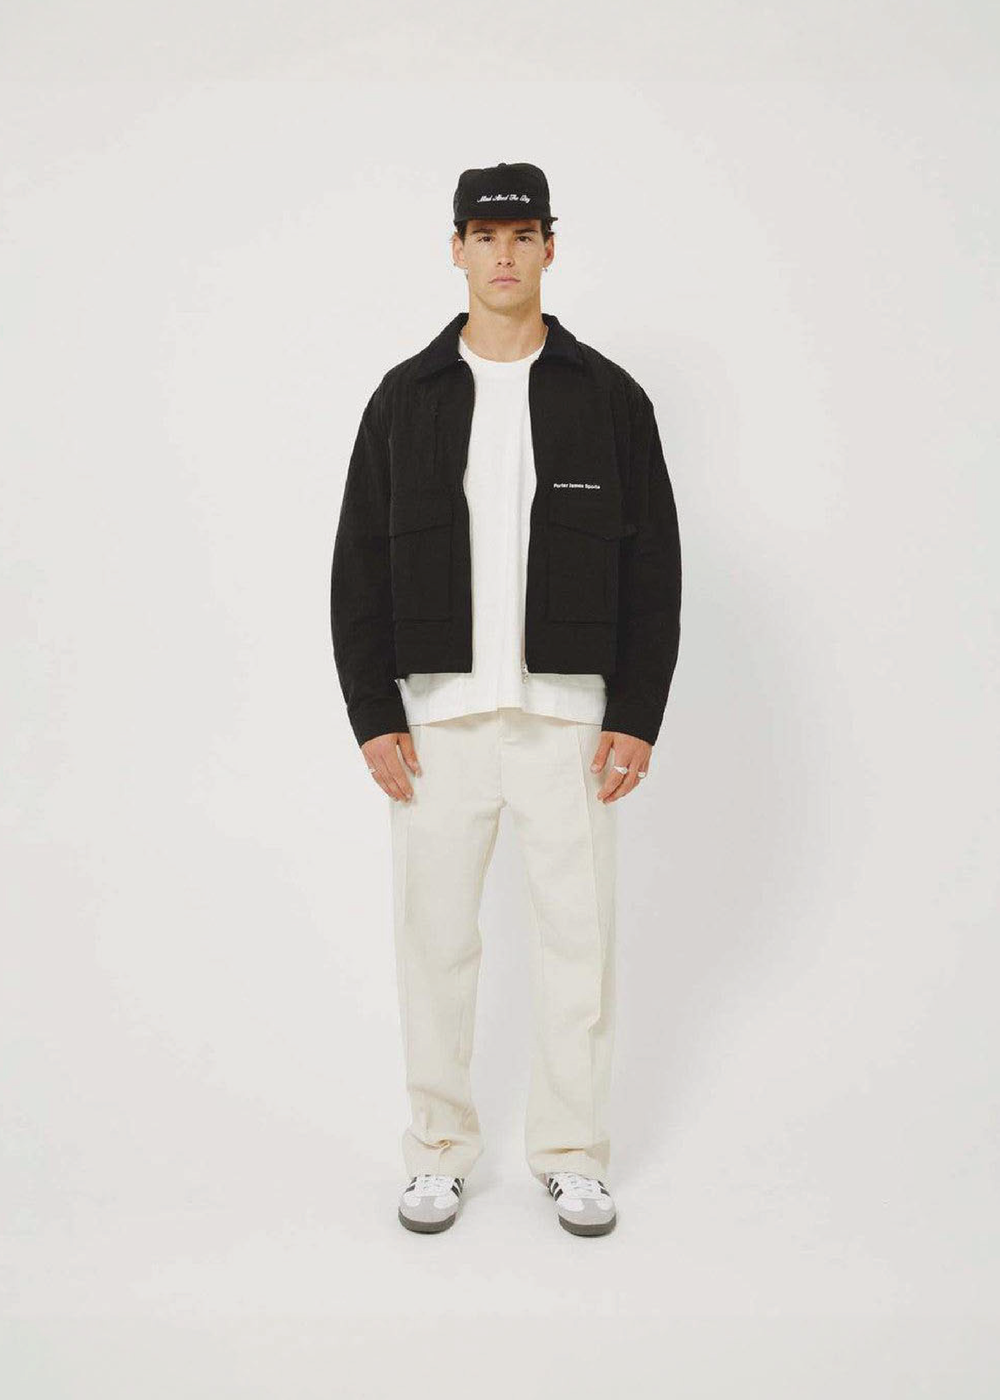 Porter James Sports Utility Jacket - Black Two-Toned | PORTER JAMES SPORTS | Mad About The Boy